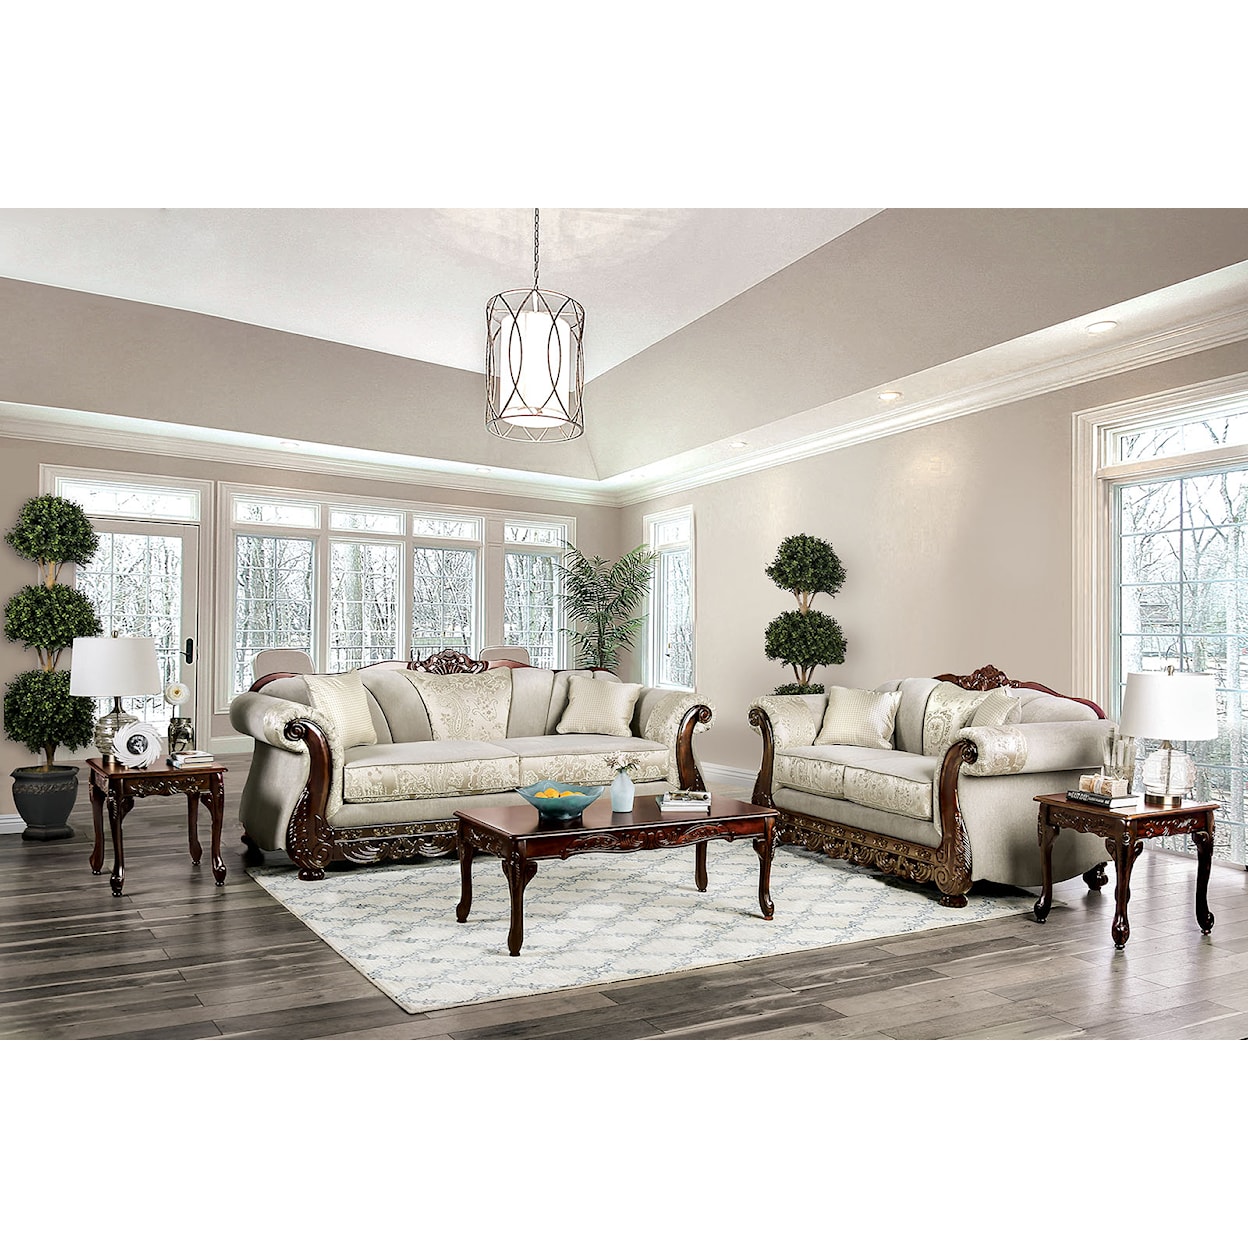 Furniture of America Newdale Sofa and Loveseat Set 